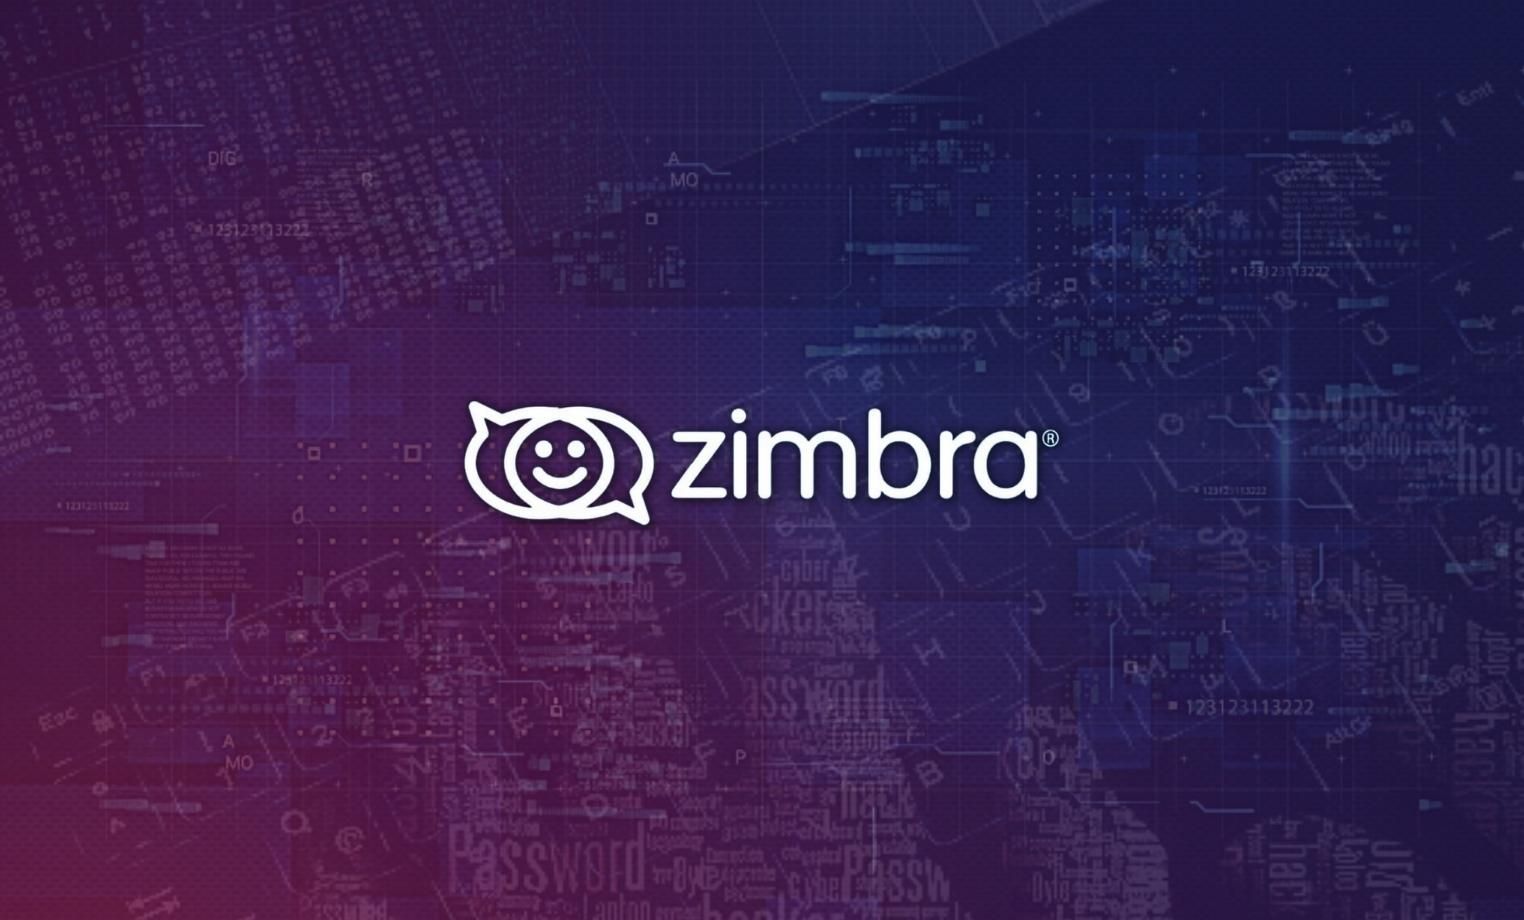 A flaw in Zimbra email suite allows stealing login credentials of